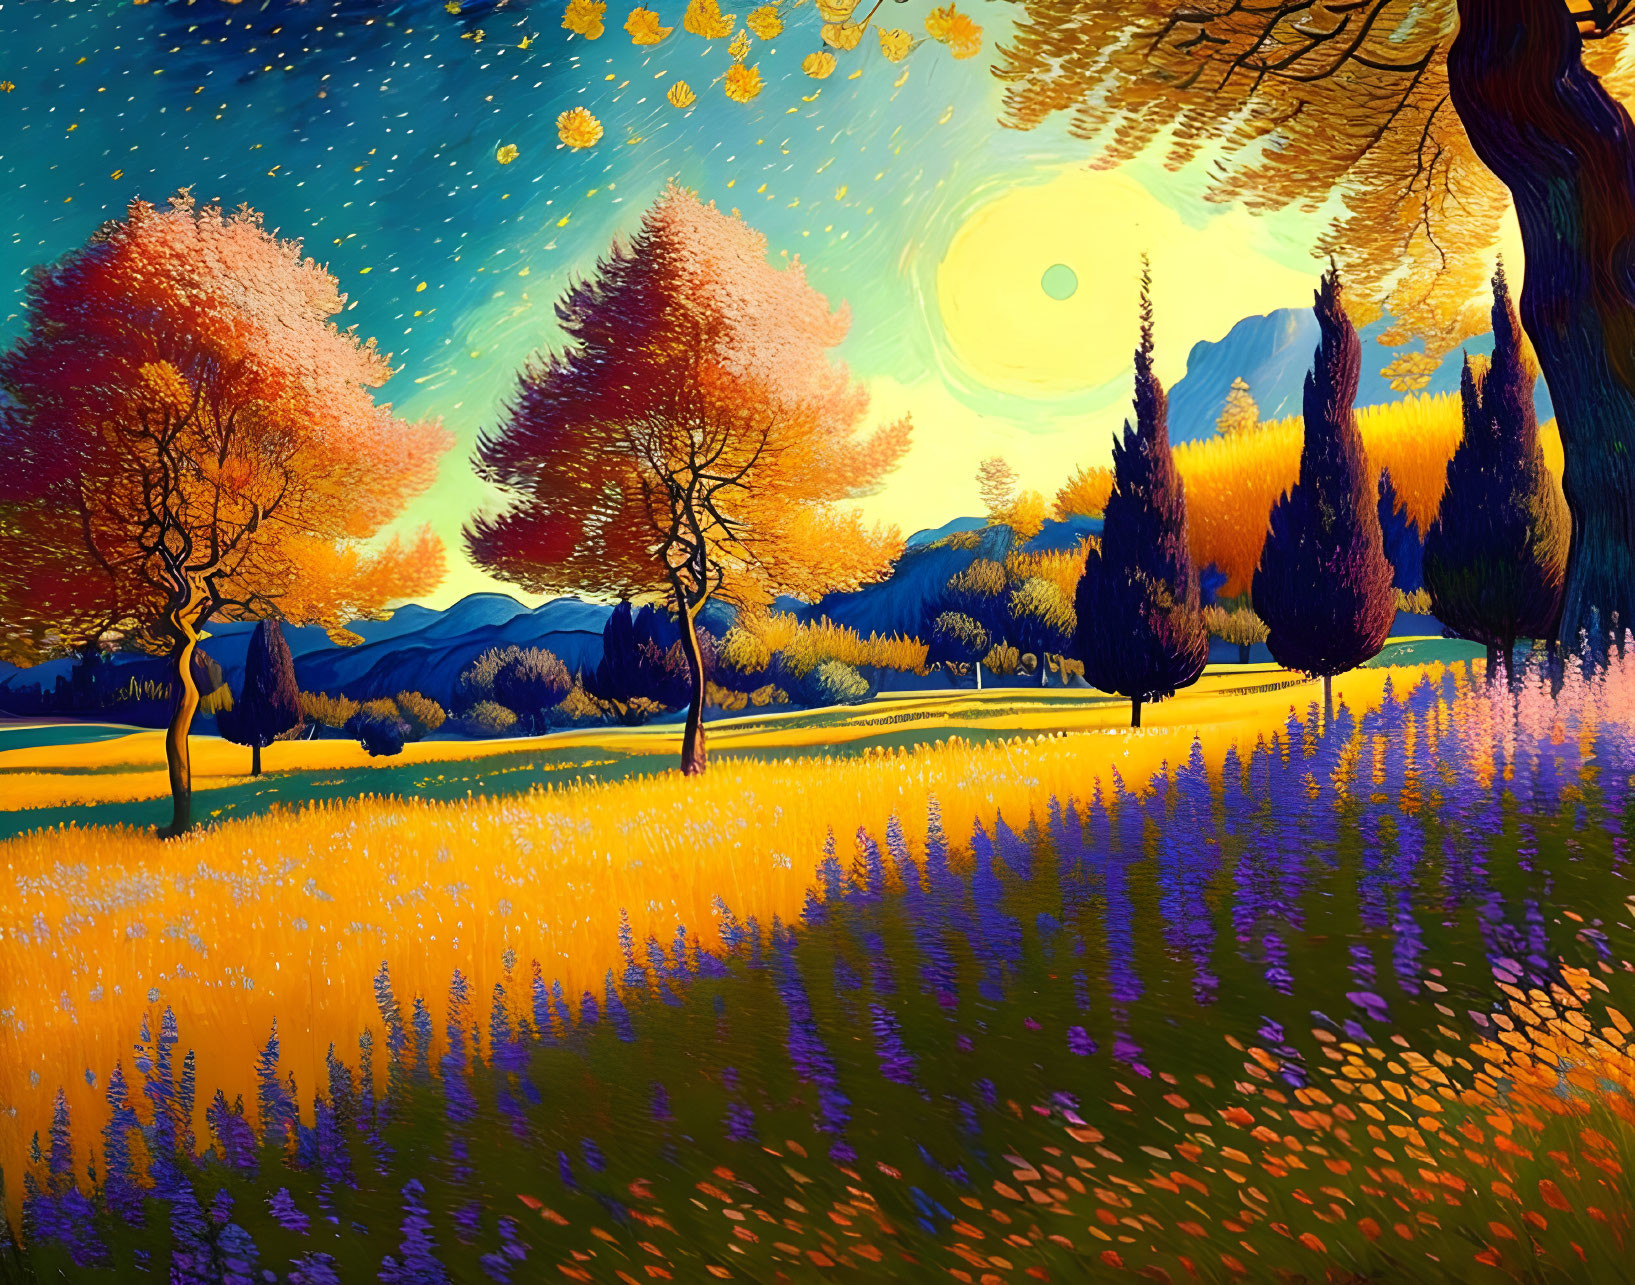 Colorful sunlit field with purple flowers and distant mountains under a magical sunset